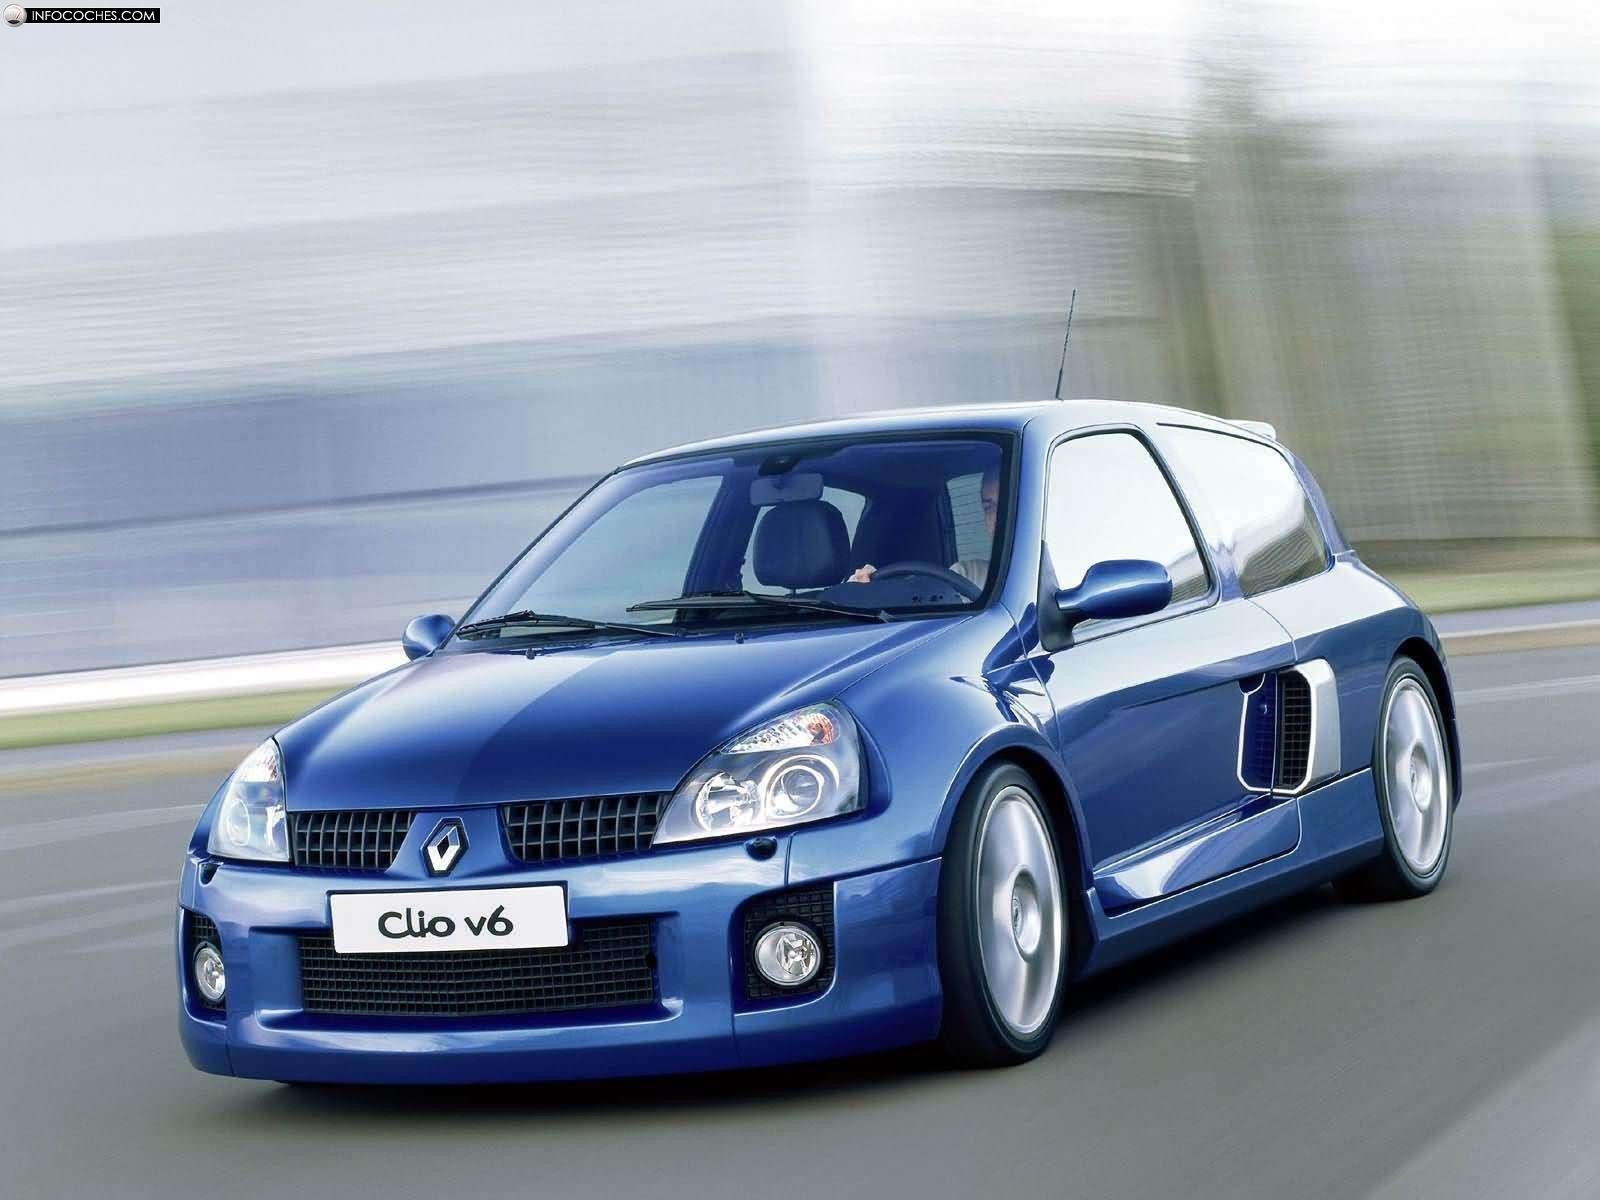 cars, Vehicles, Renault, Clio, Renault, Sports, Cars, Renault, Clio, V6 Wallpaper